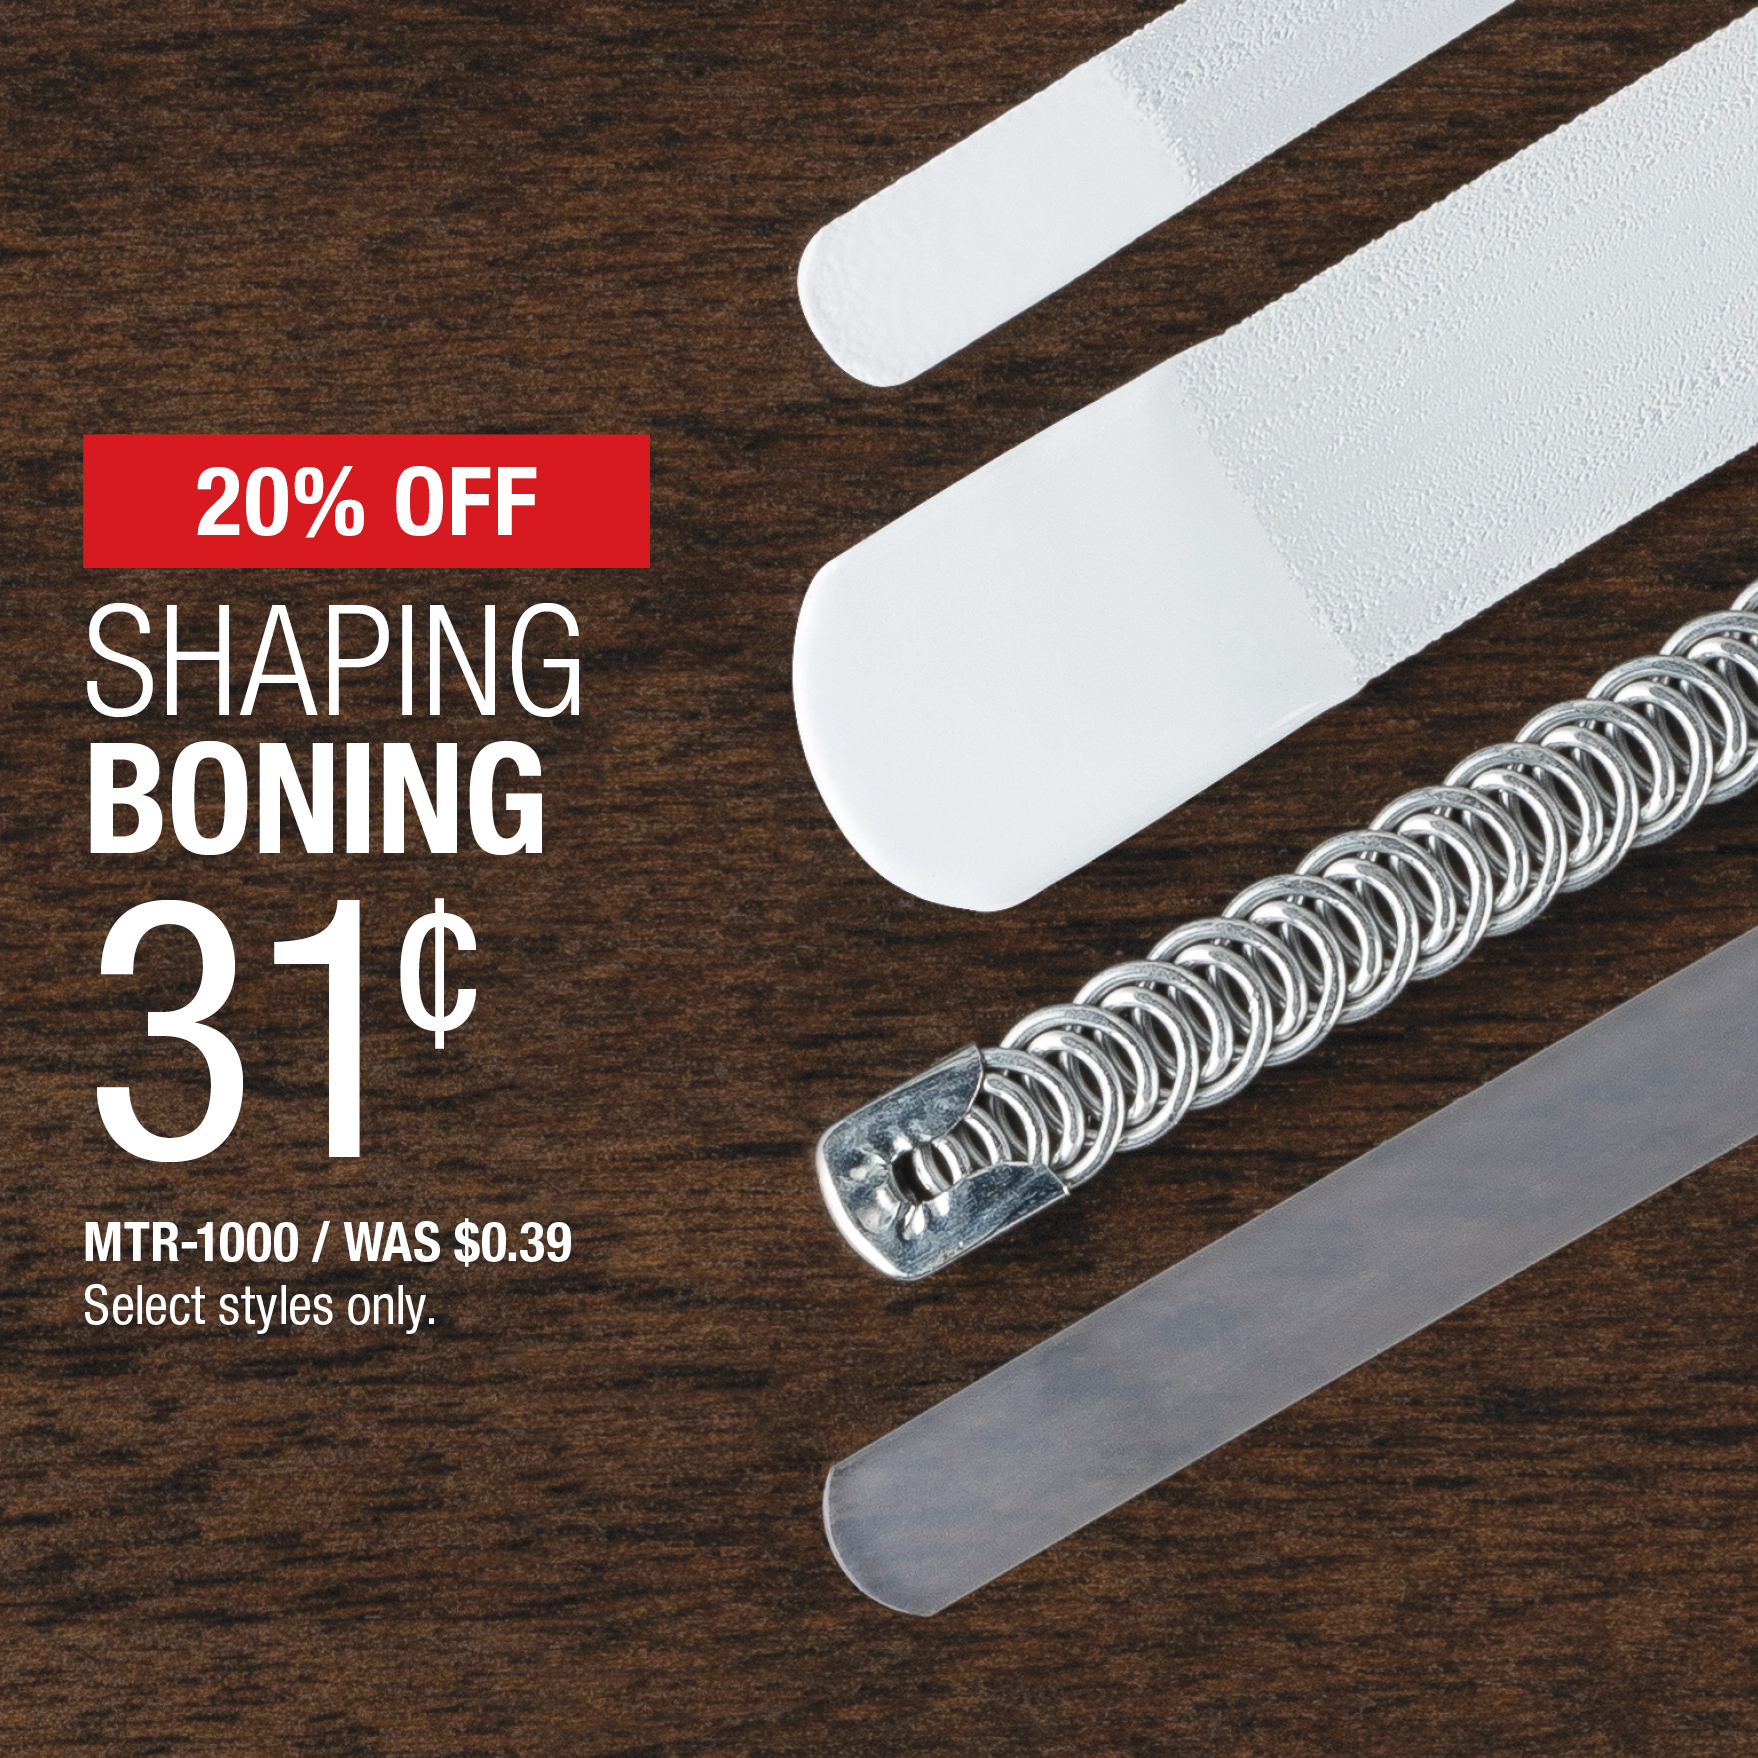 20% Off Shaping Boning .31¢ / MTR-1000 / Was .39¢ / Select styles only.